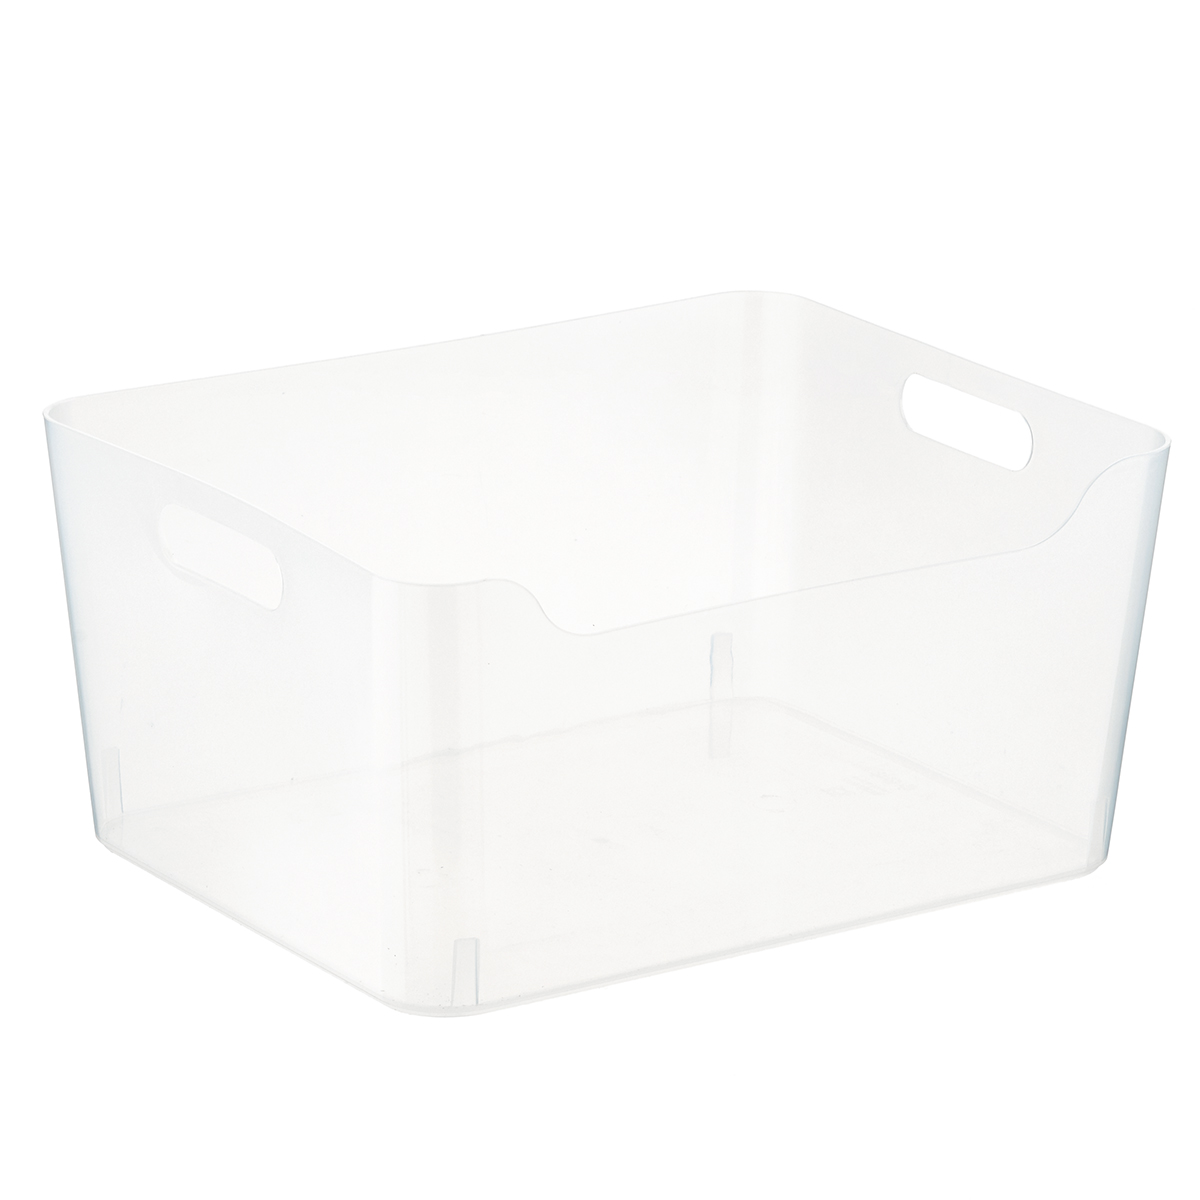 https://images.containerstore.com/catalogimages?sku=10073991